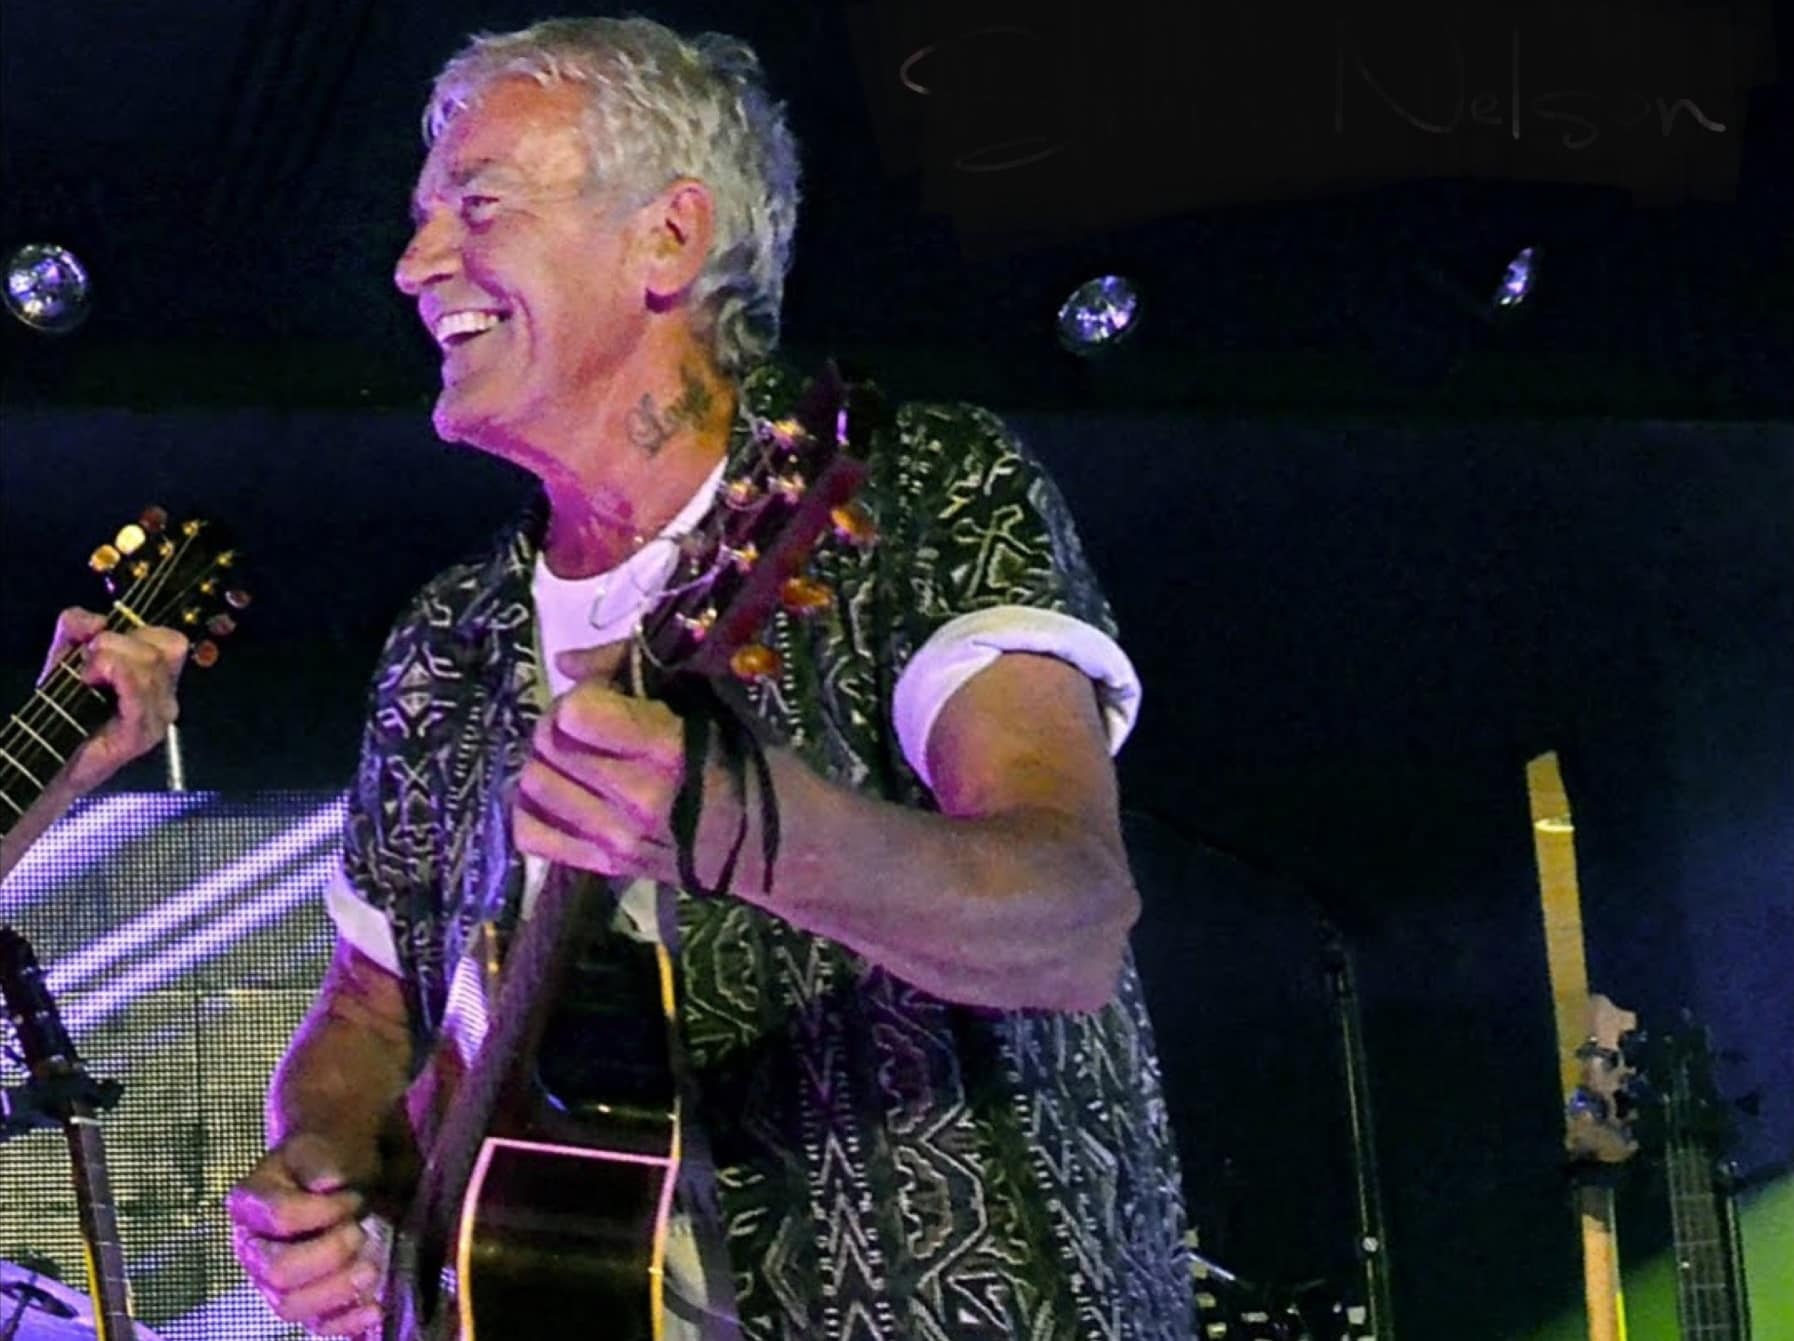 Steve Nelson has been performing on the Costa del Sol since 1982.